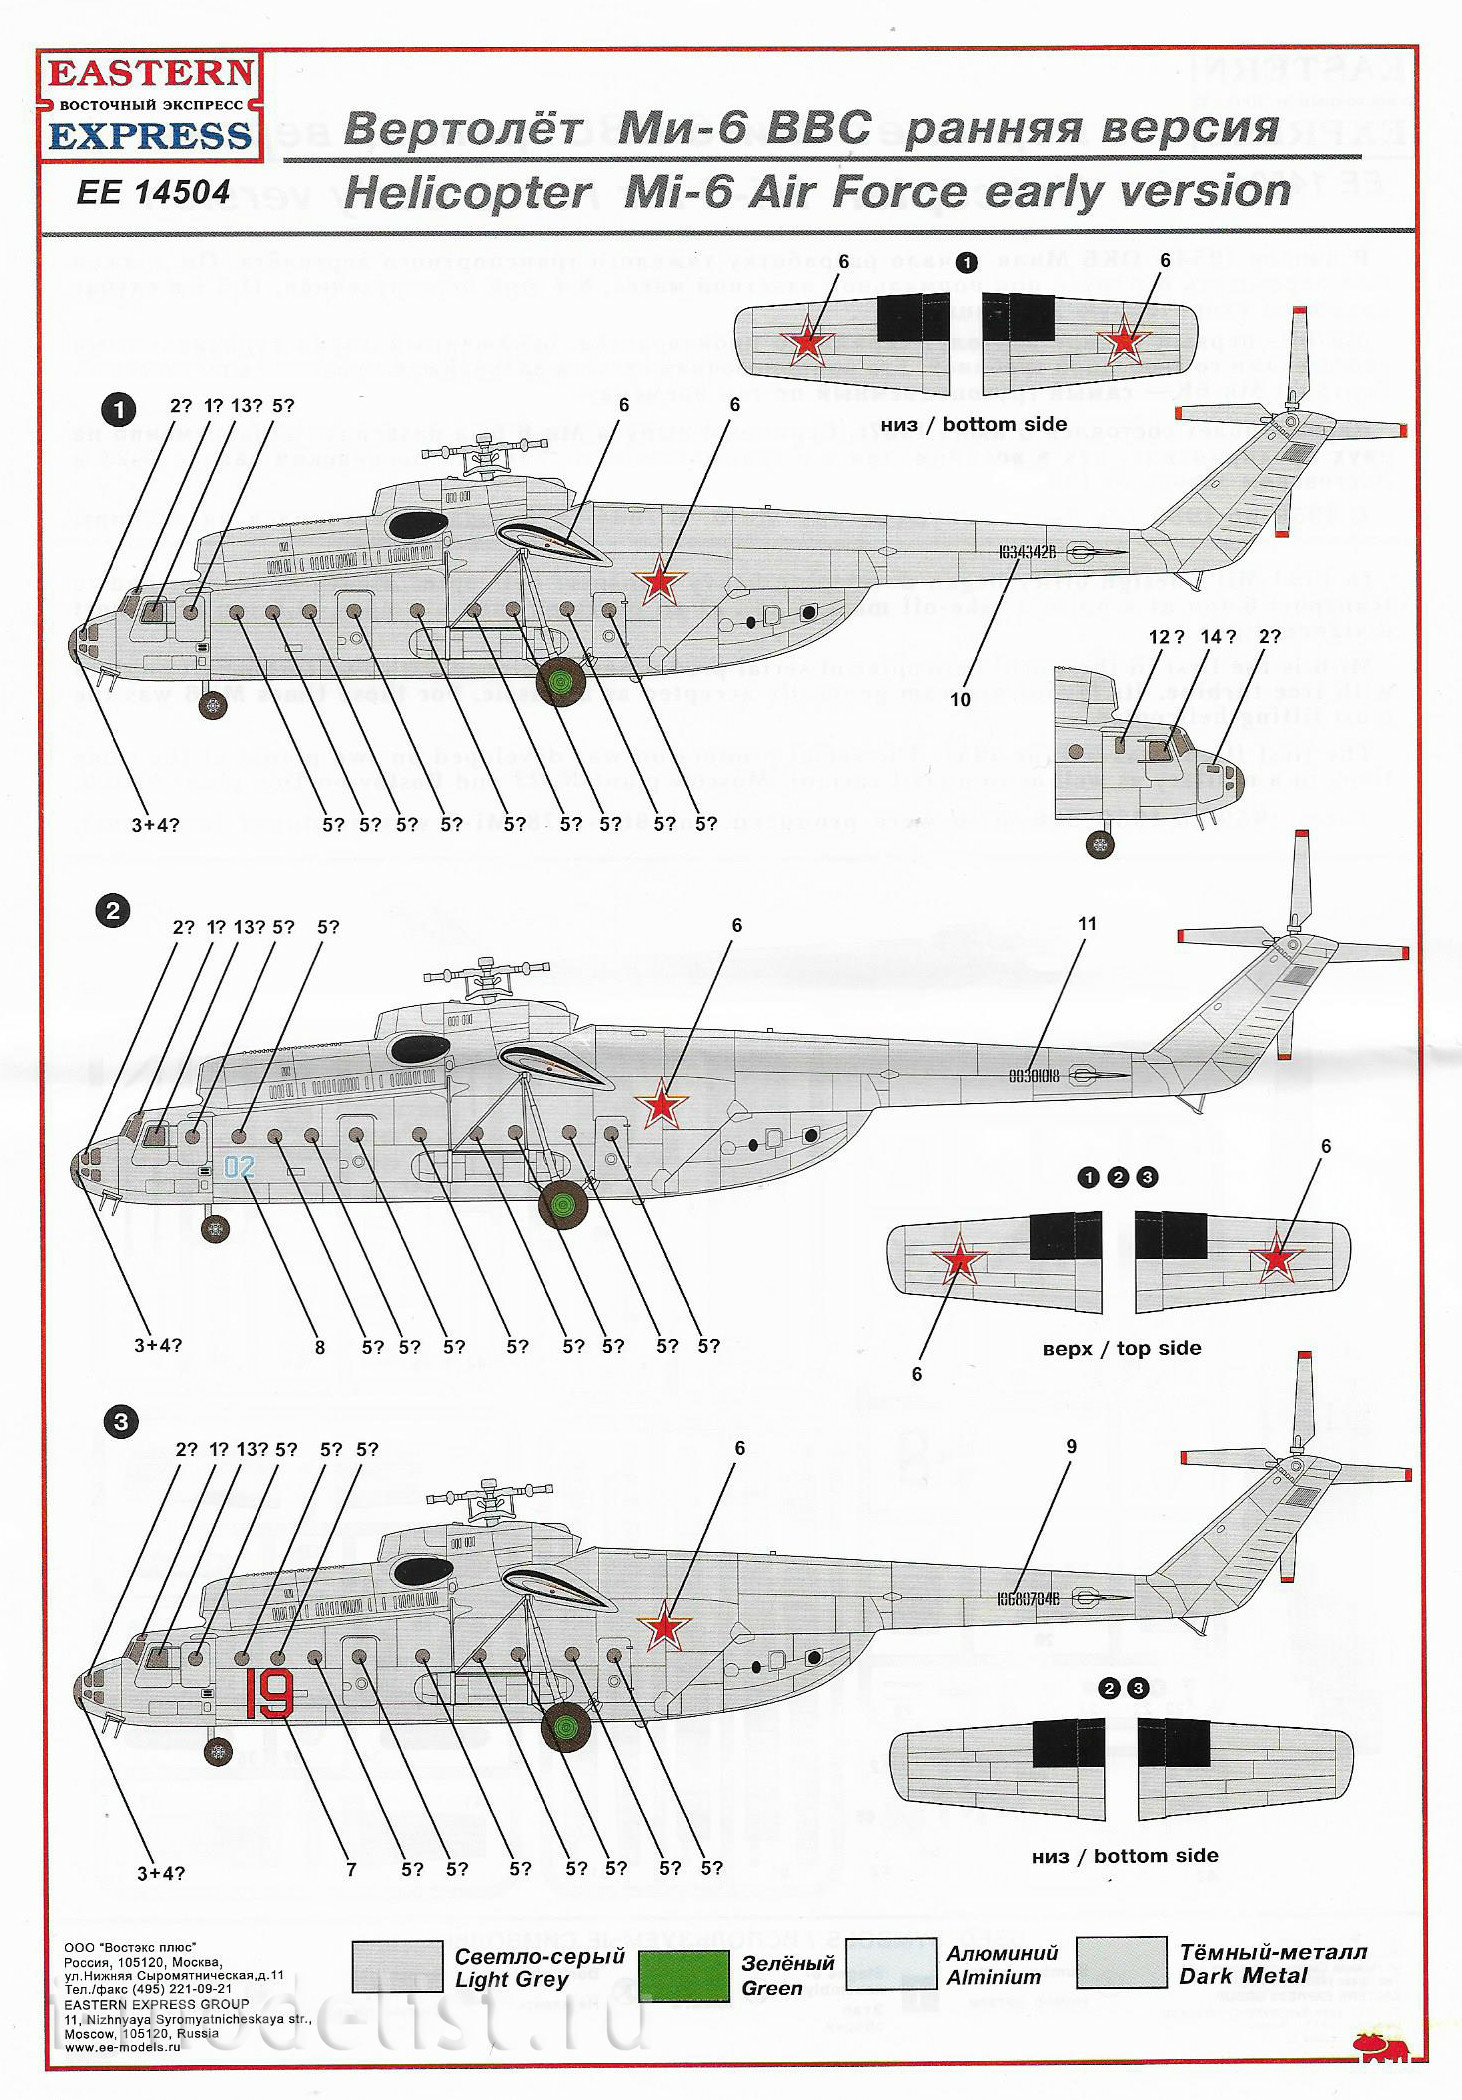 14506 Eastern Express 1/144 scales Heavy multi-purpose helicopter 